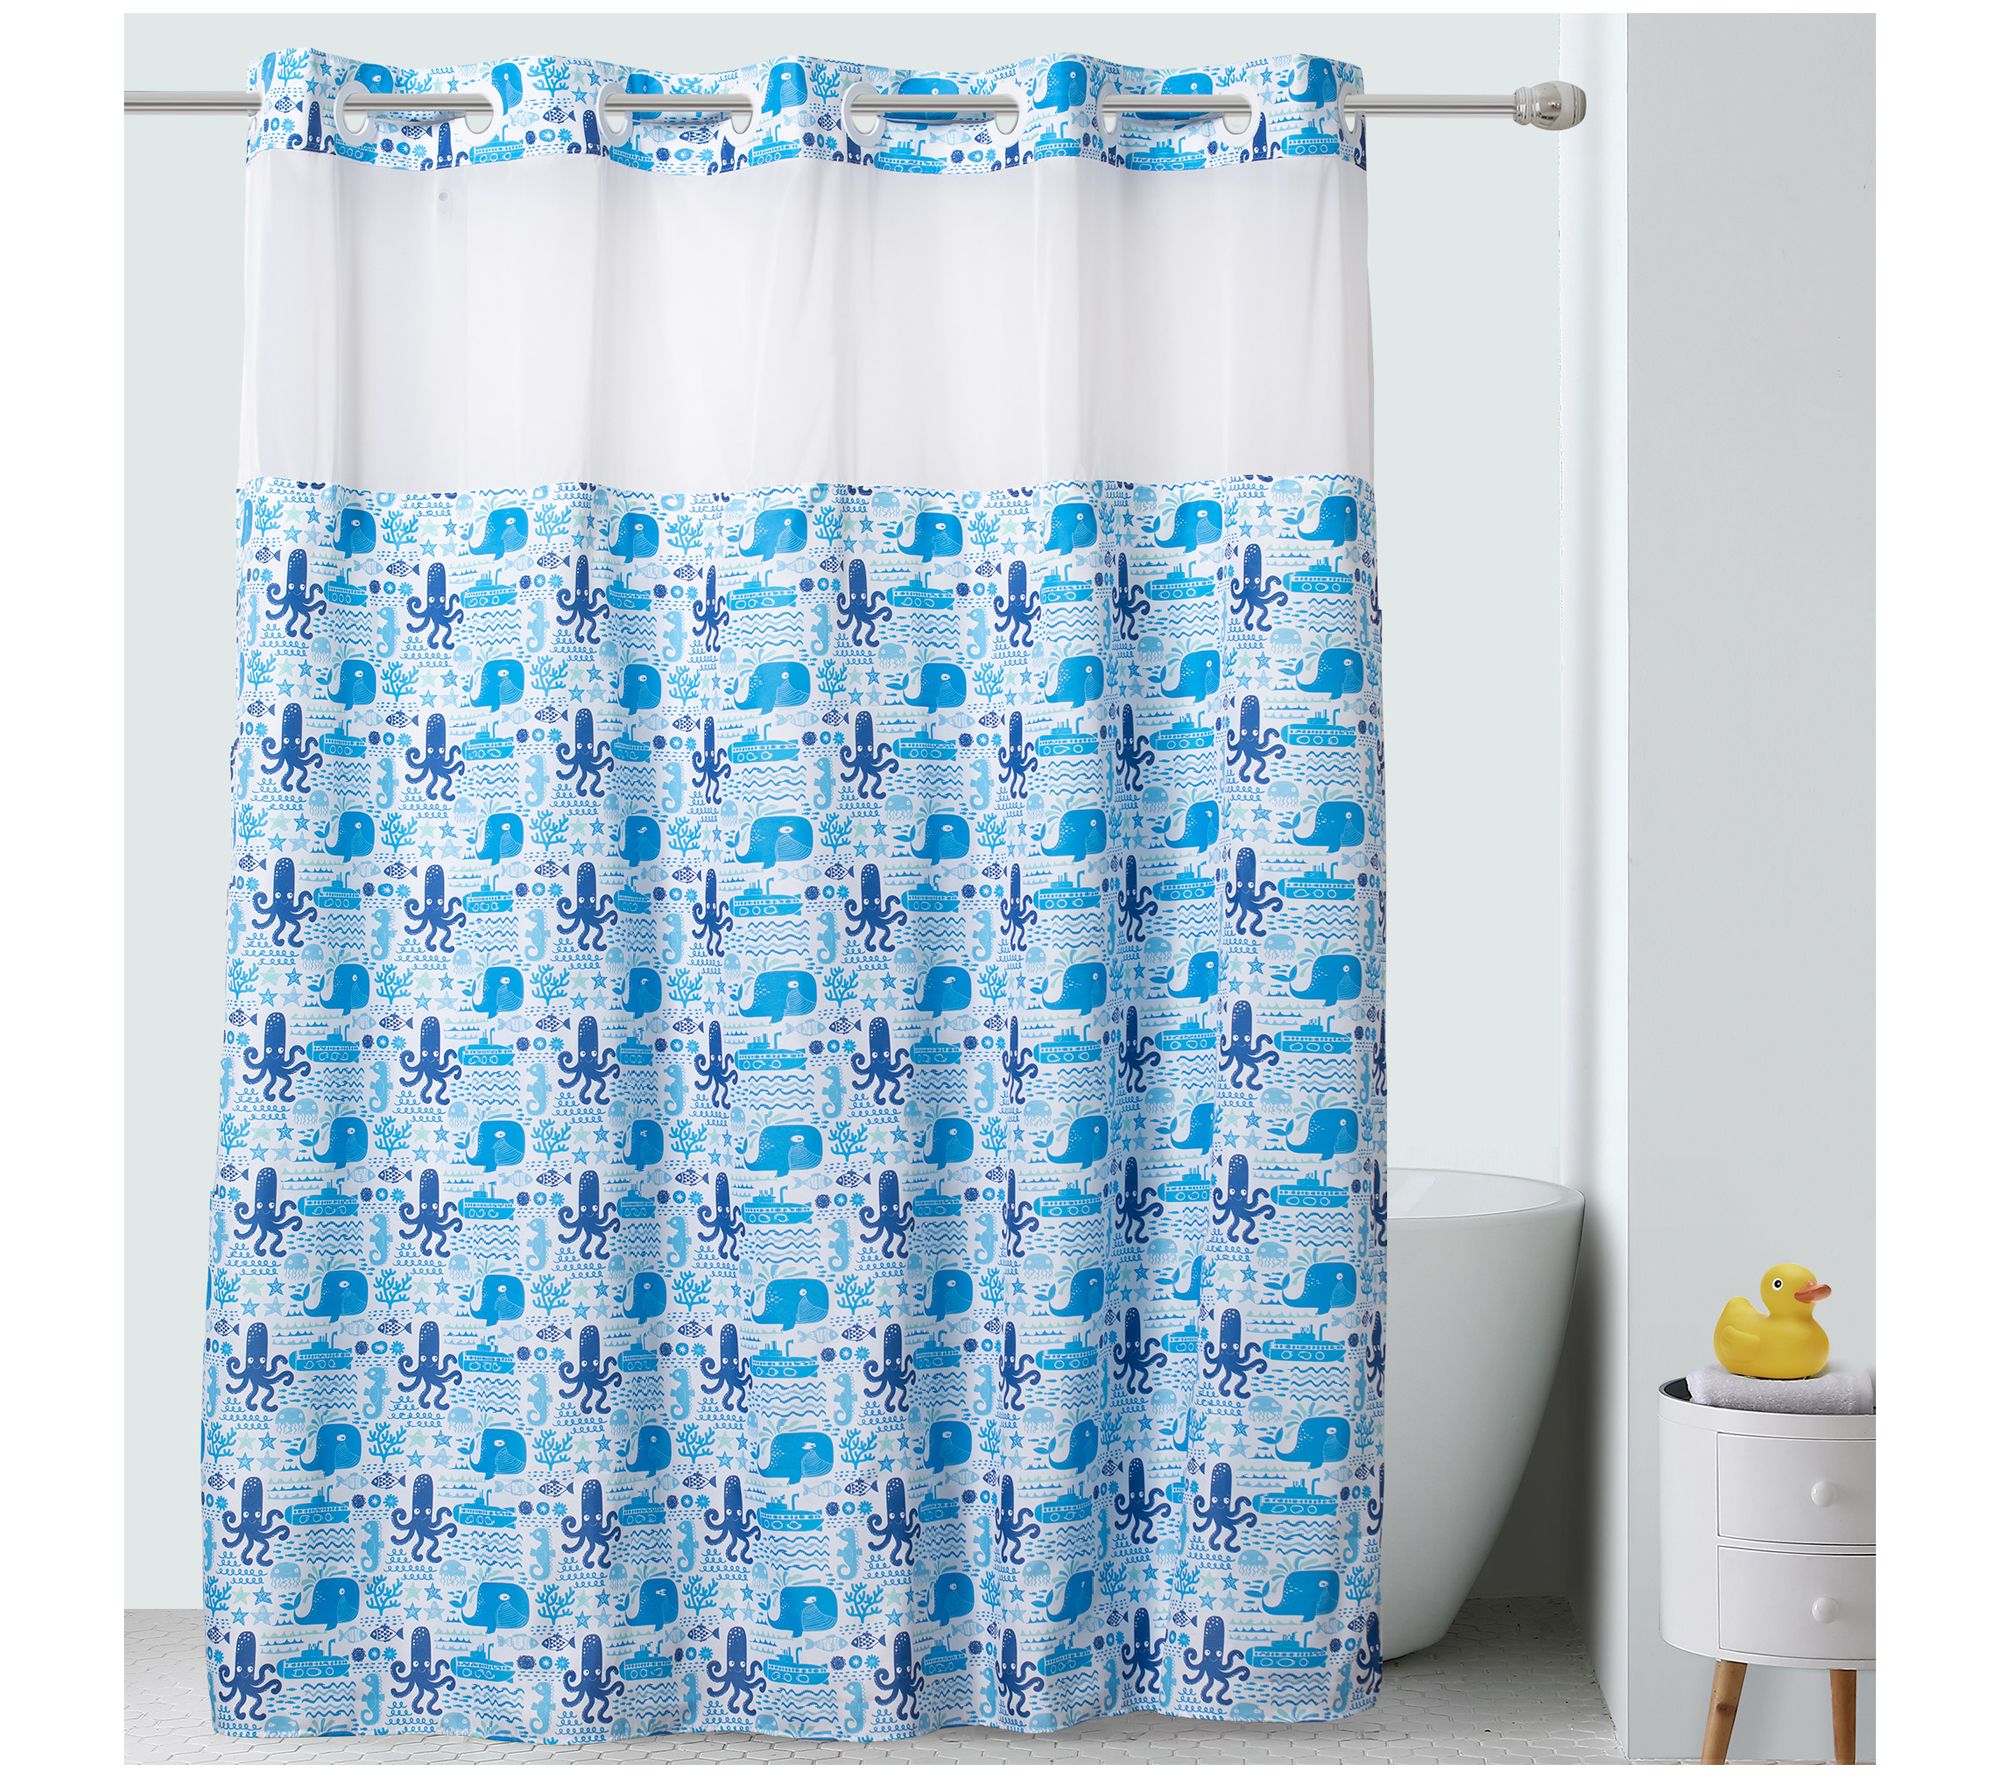 Hookless Shower Curtain For Kids Silly, Hookless Shower Curtain With Window